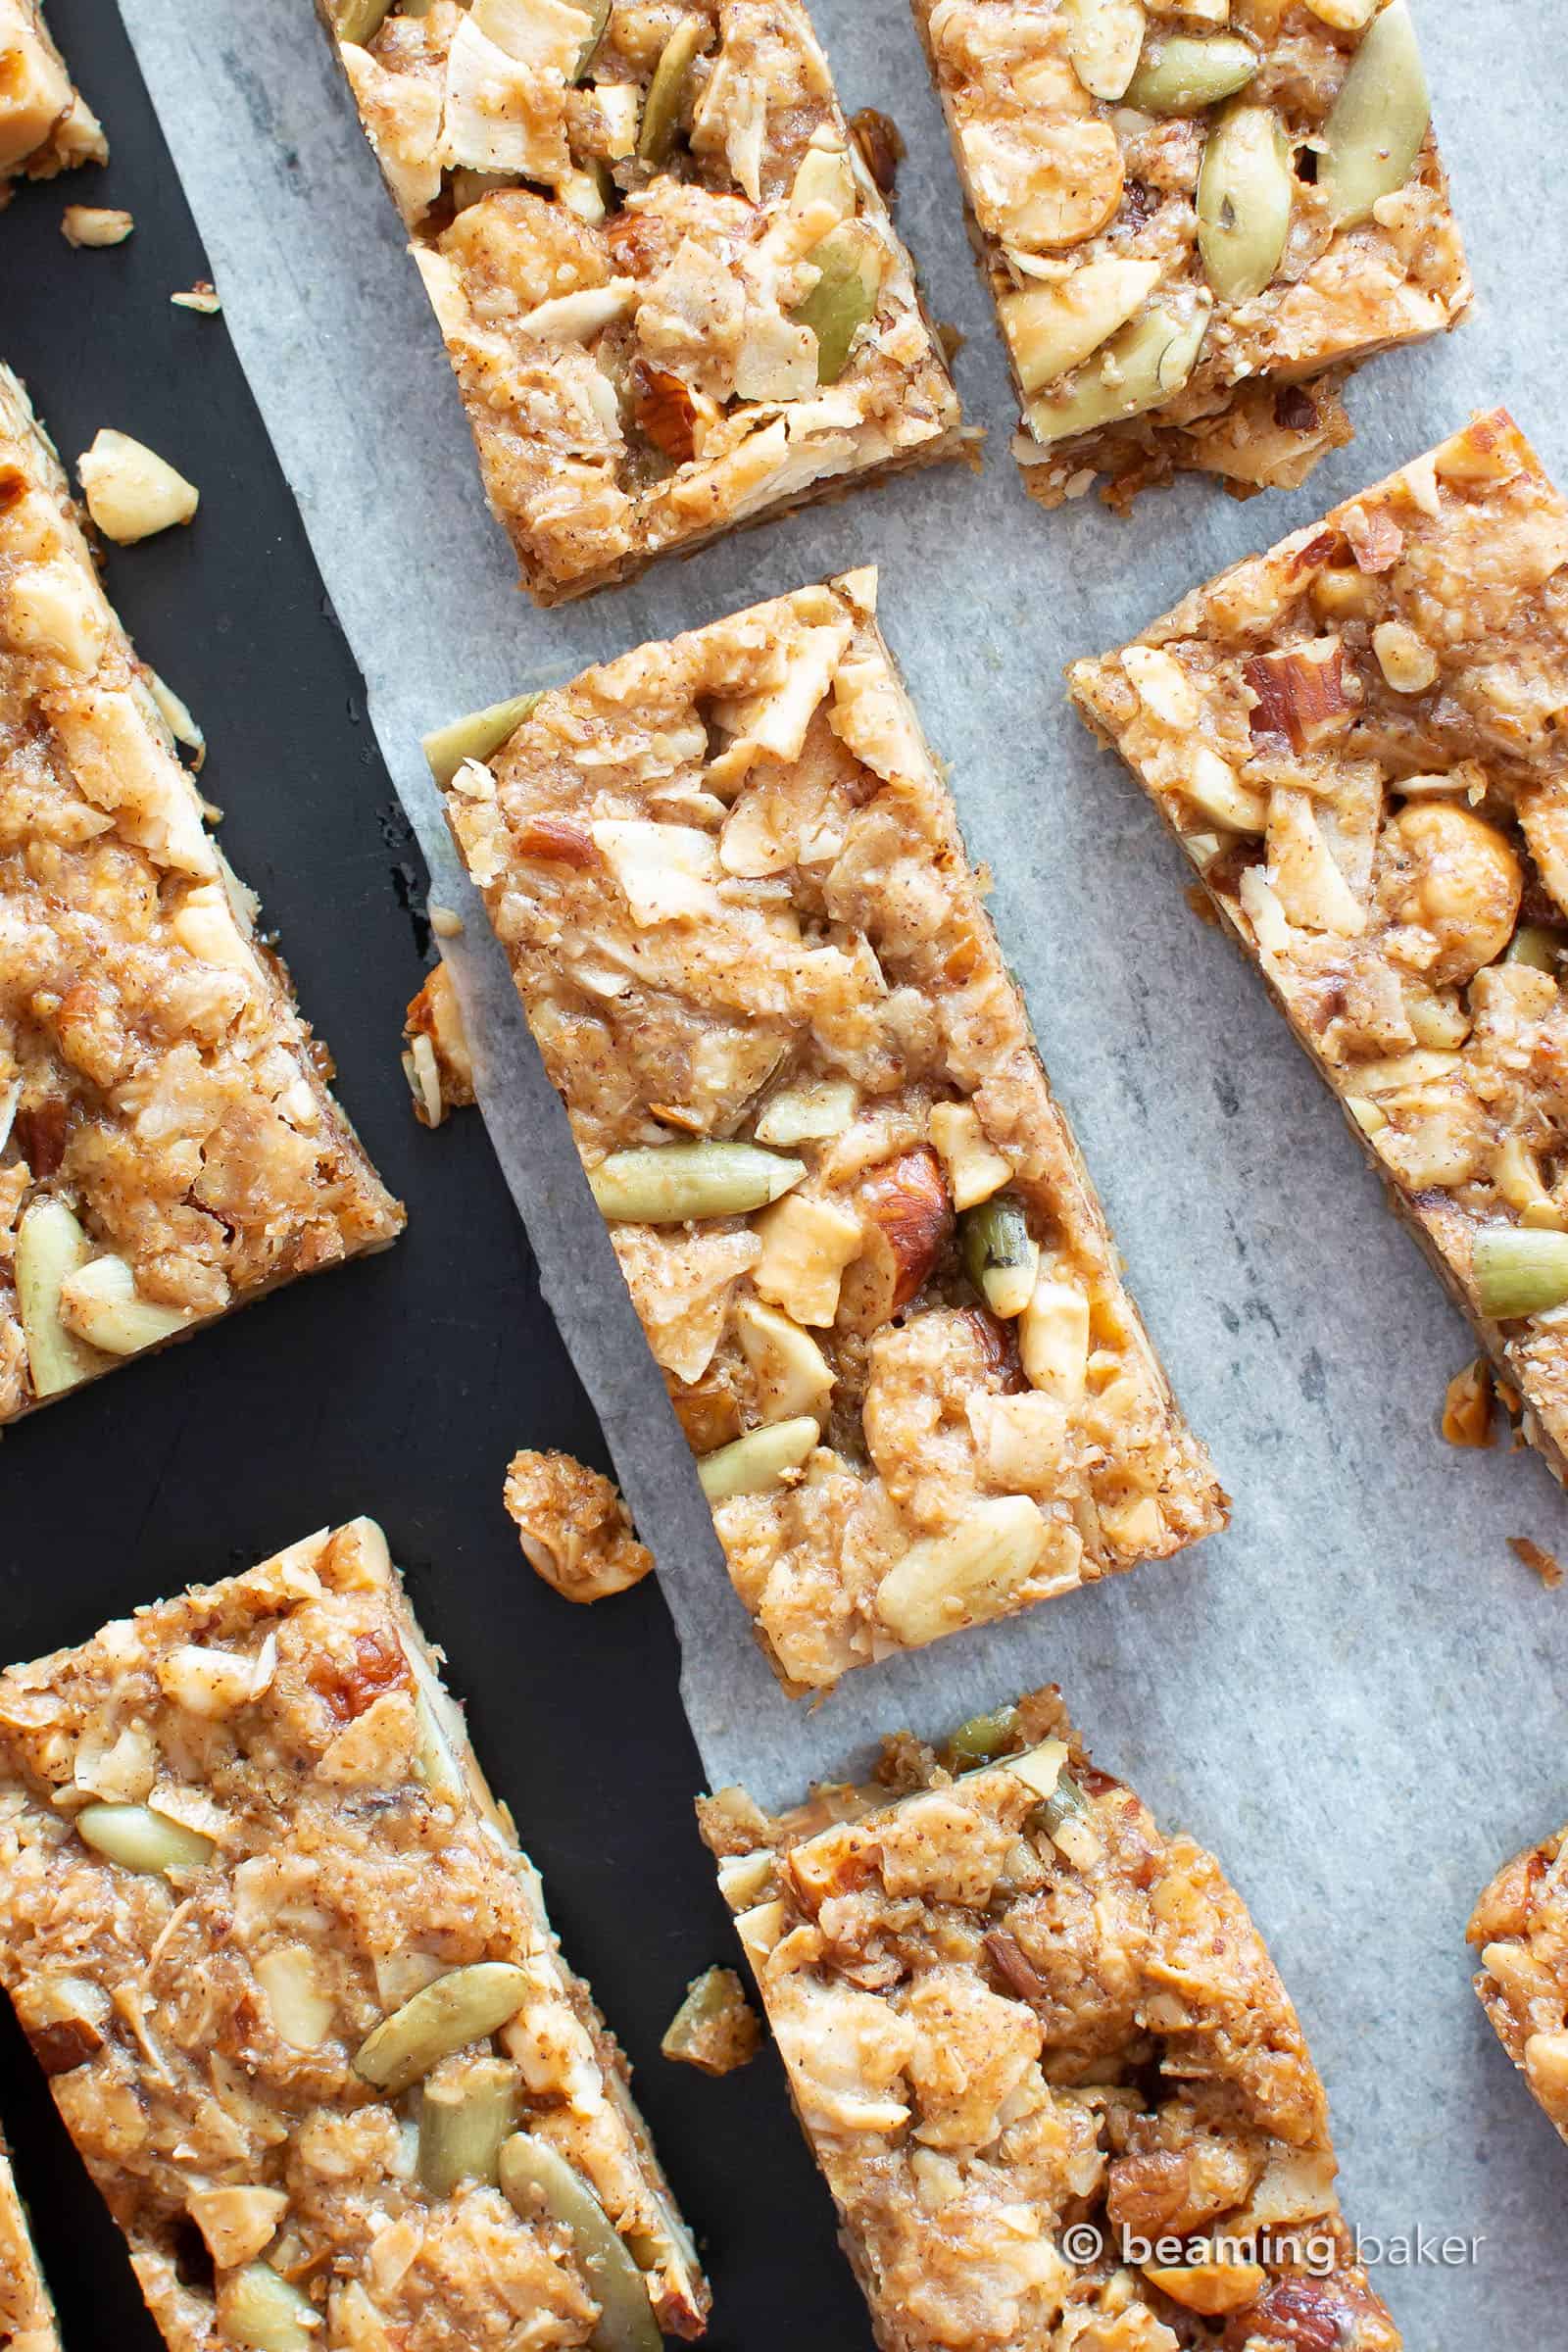 Homemade Paleo Granola Bars (V, GF): the BEST grain free granola bars recipe—chewy & satisfying, packed with nutty crunch and simple, whole ingredients. Gluten Free, Vegan, Paleo, Protein-Rich, Dairy-Free. #Paleo #GrainFree #GranolaBars #Healthy #Snacks | Recipe at BeamingBaker.com